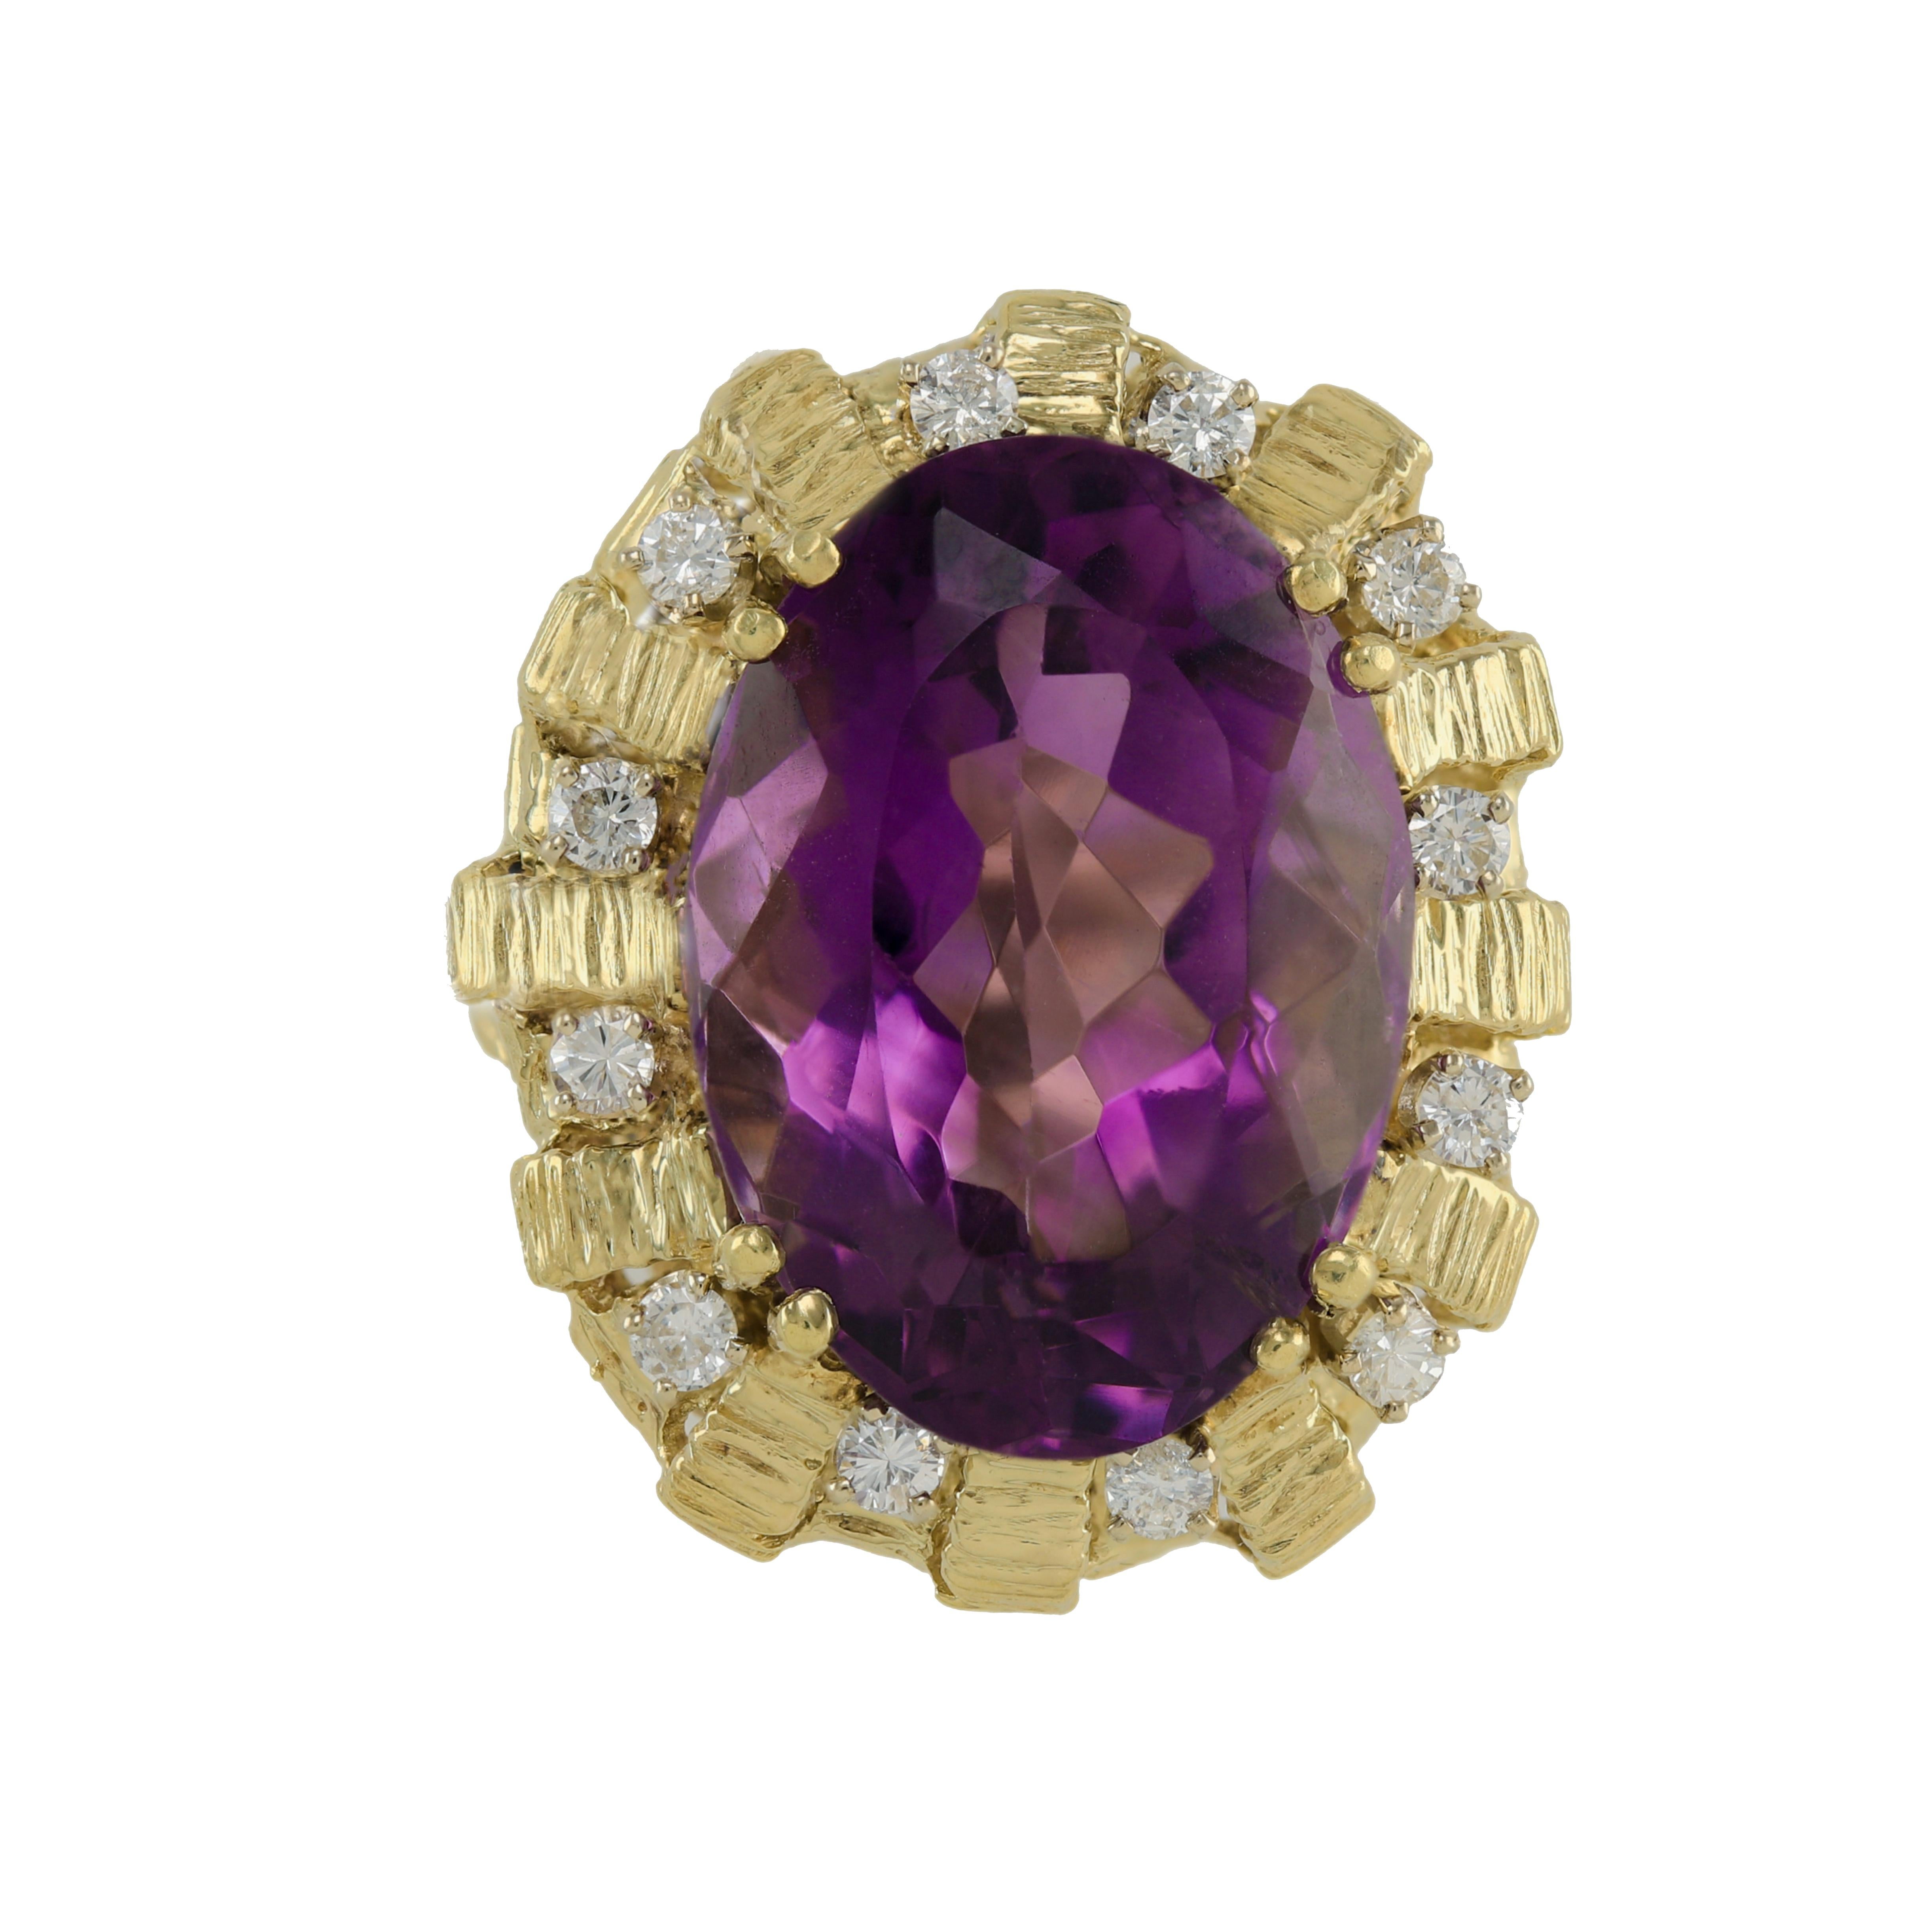 Modernist Huge Artistic 30.0 Carat Amethyst and Diamond Gold Cage Cocktail Ring For Sale